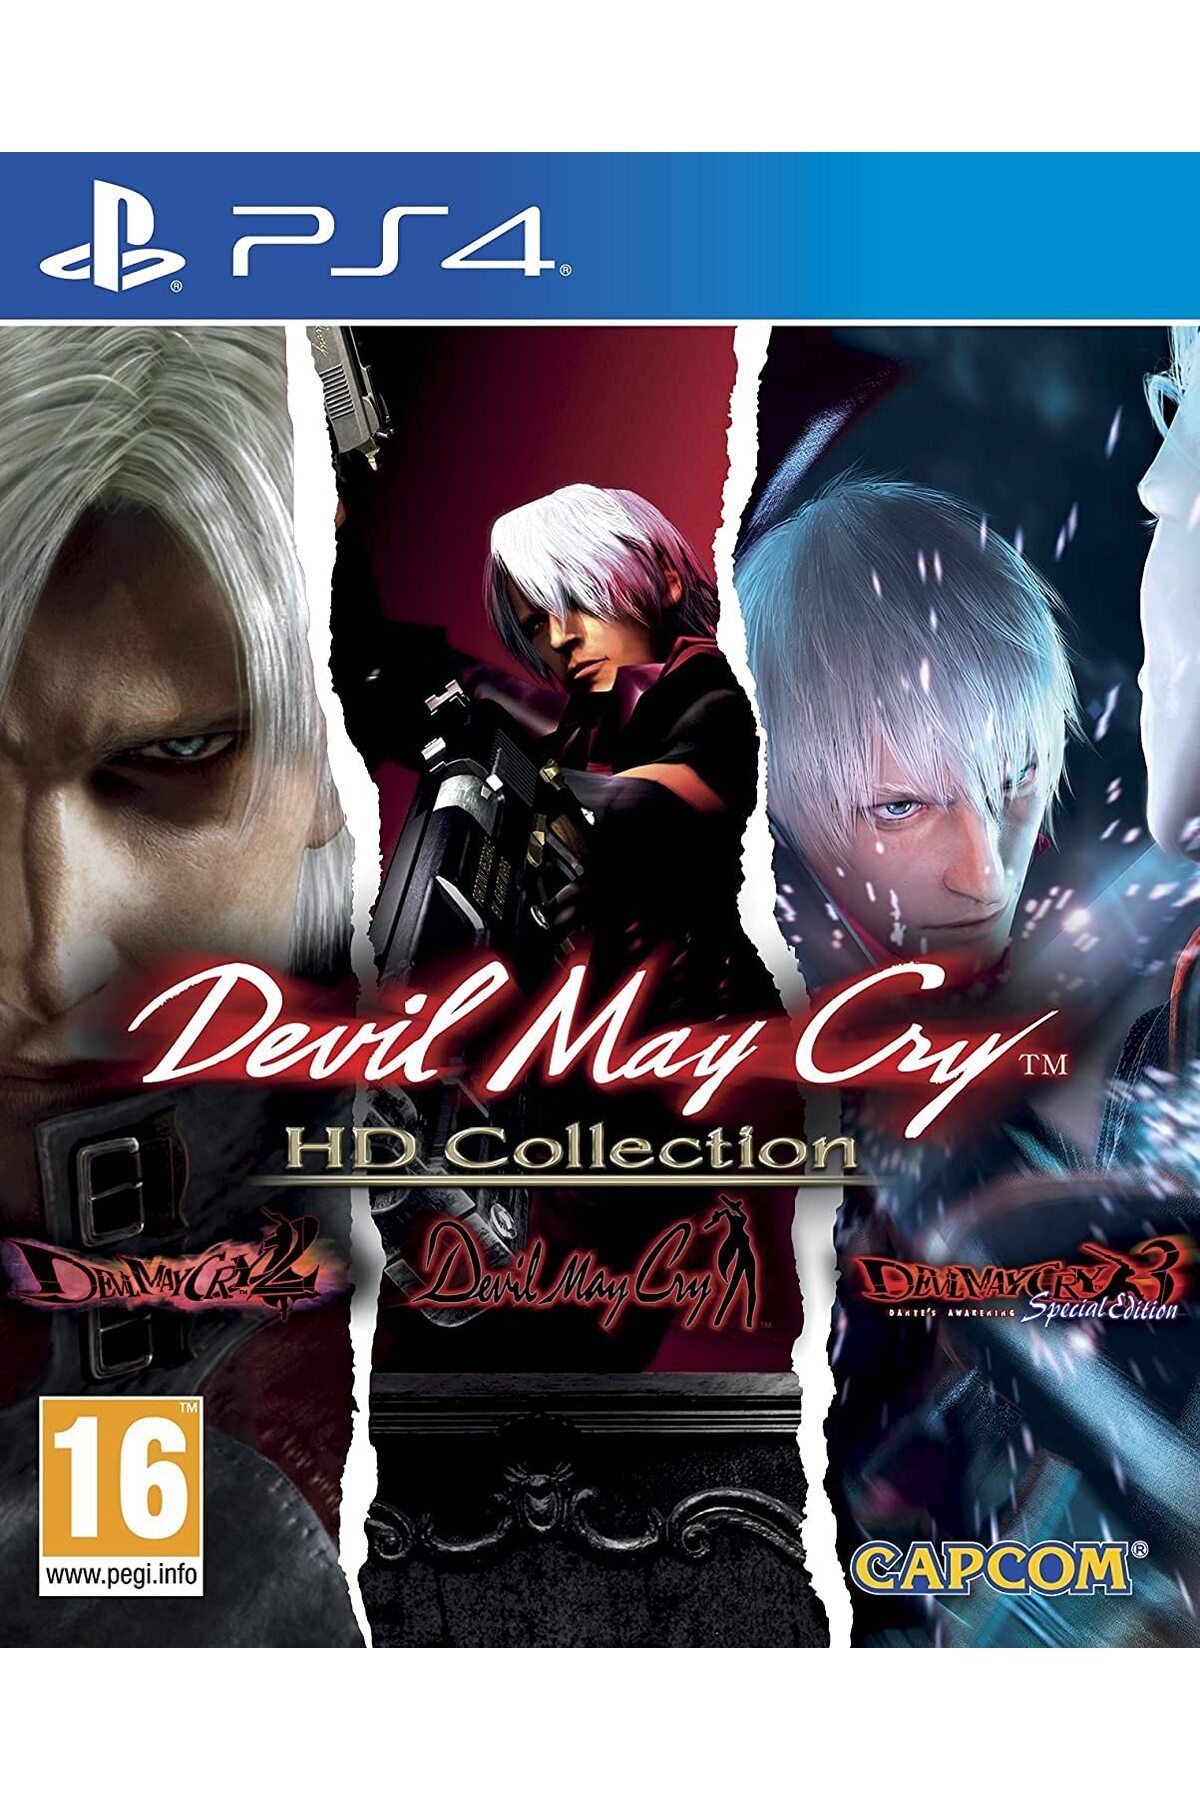 CAPCOM Ps4 Devil May Cry Hd Collection - %100 Oyun